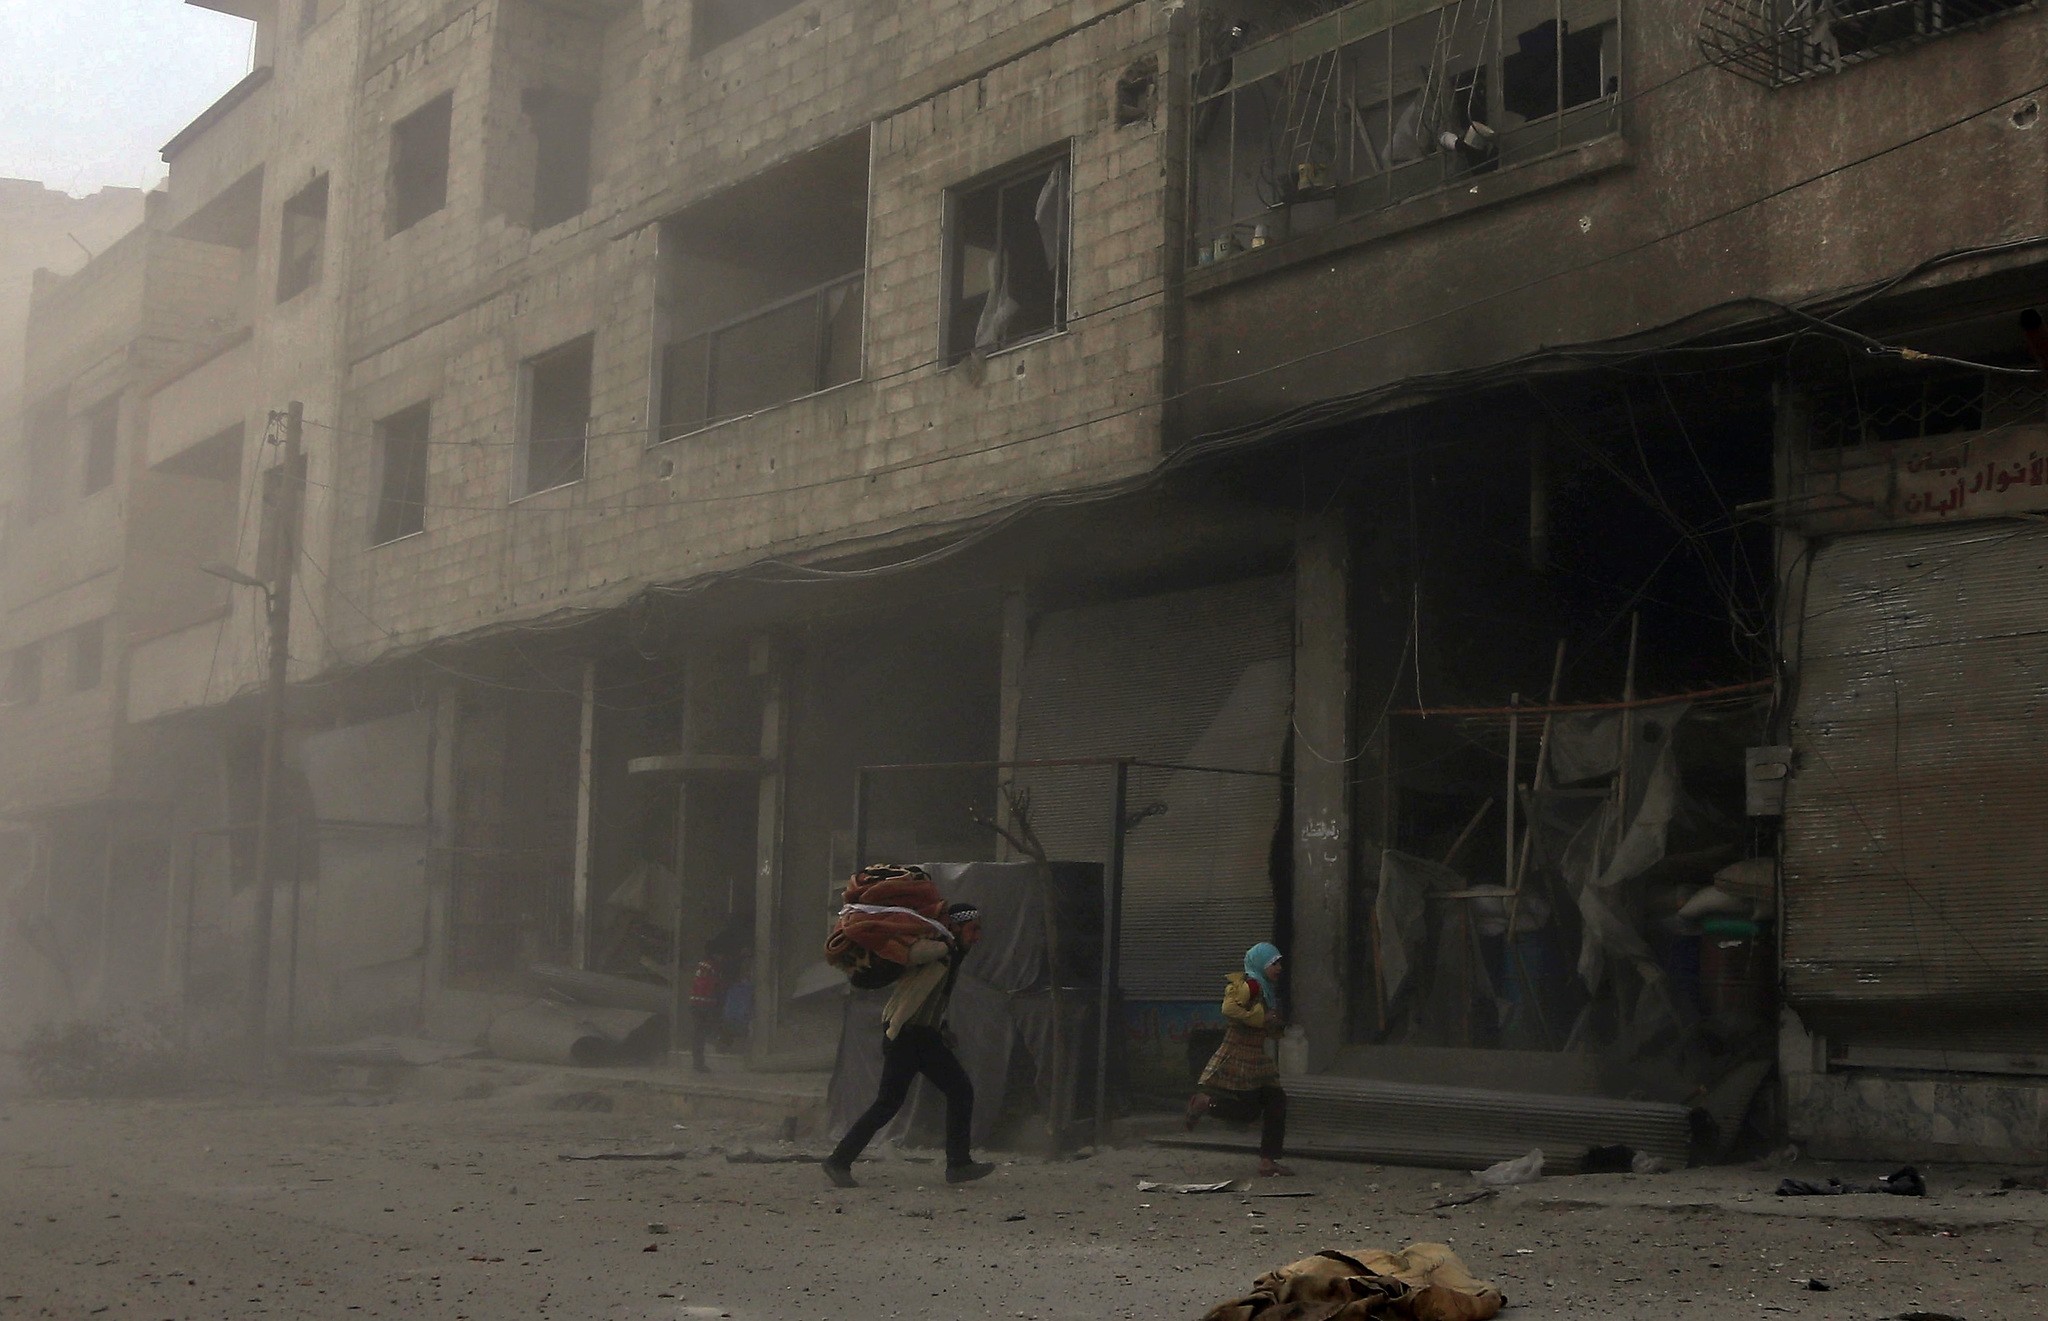 Syrians run from cover in Hamouria during regime shelling in the Eastern Ghouta suburb of Damascus, March 6.